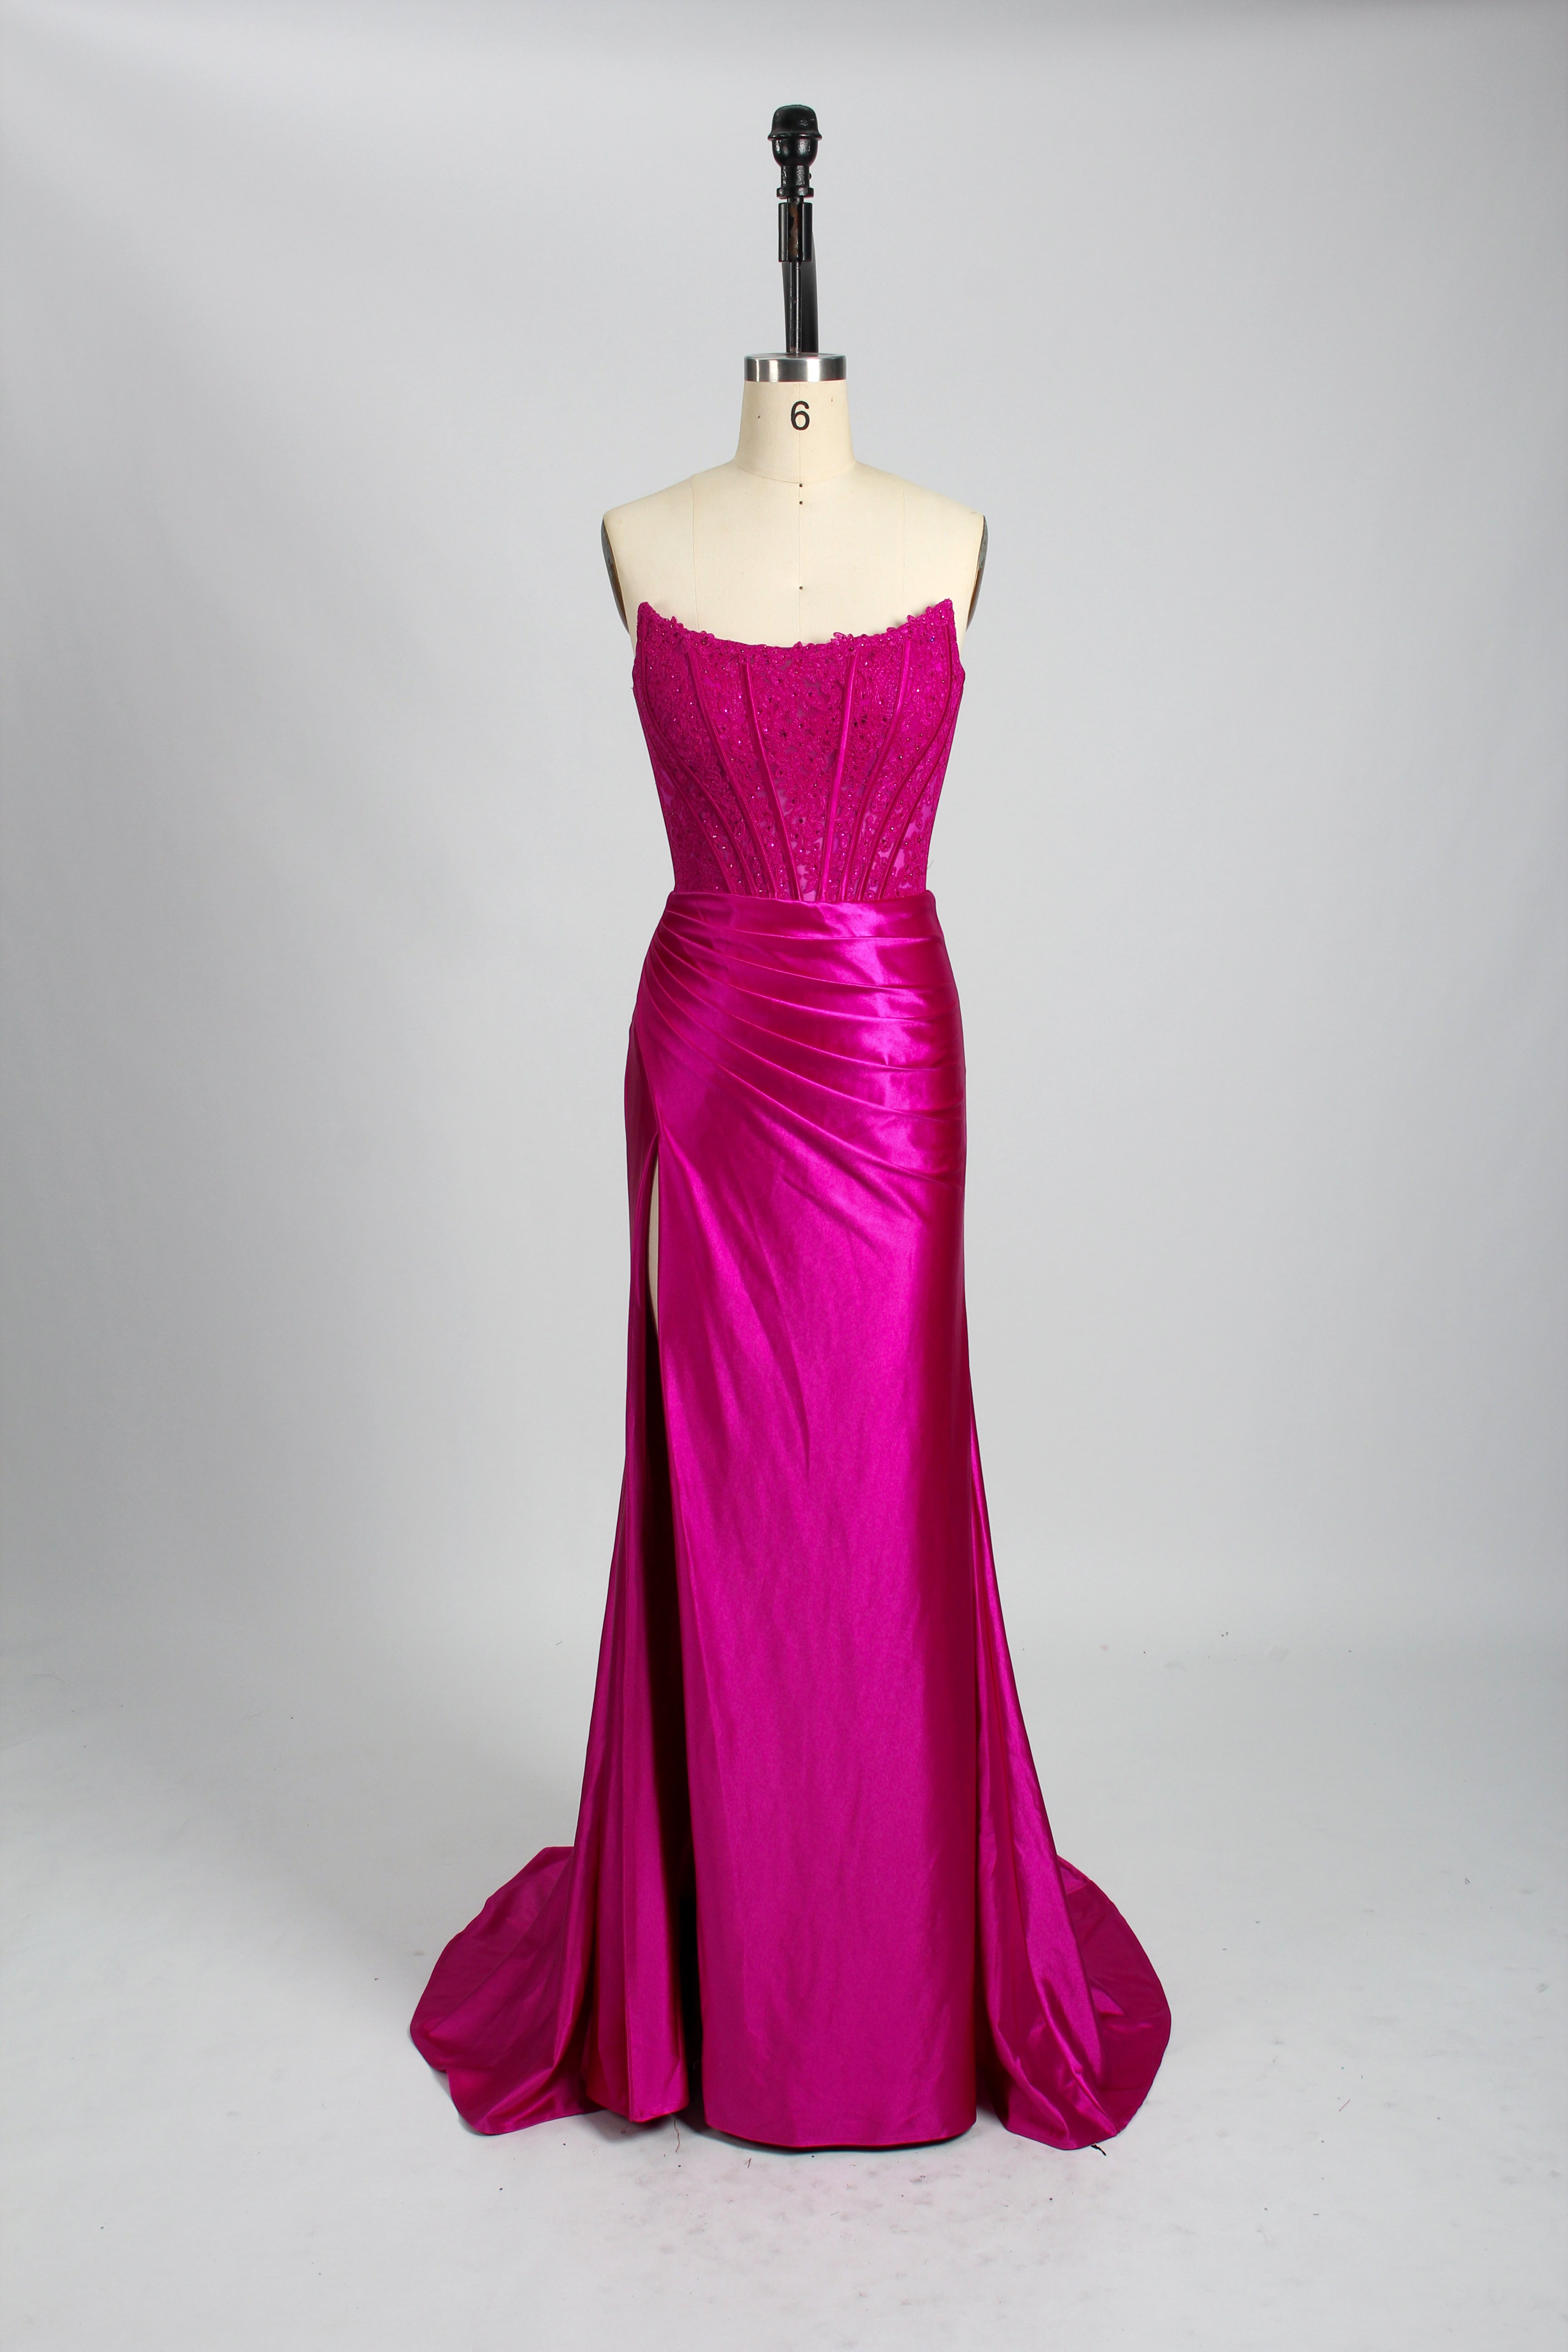 Honey Couture AUGUST Hot Pink Strapless Embellished Bustier Satin Mermaid Formal Dress